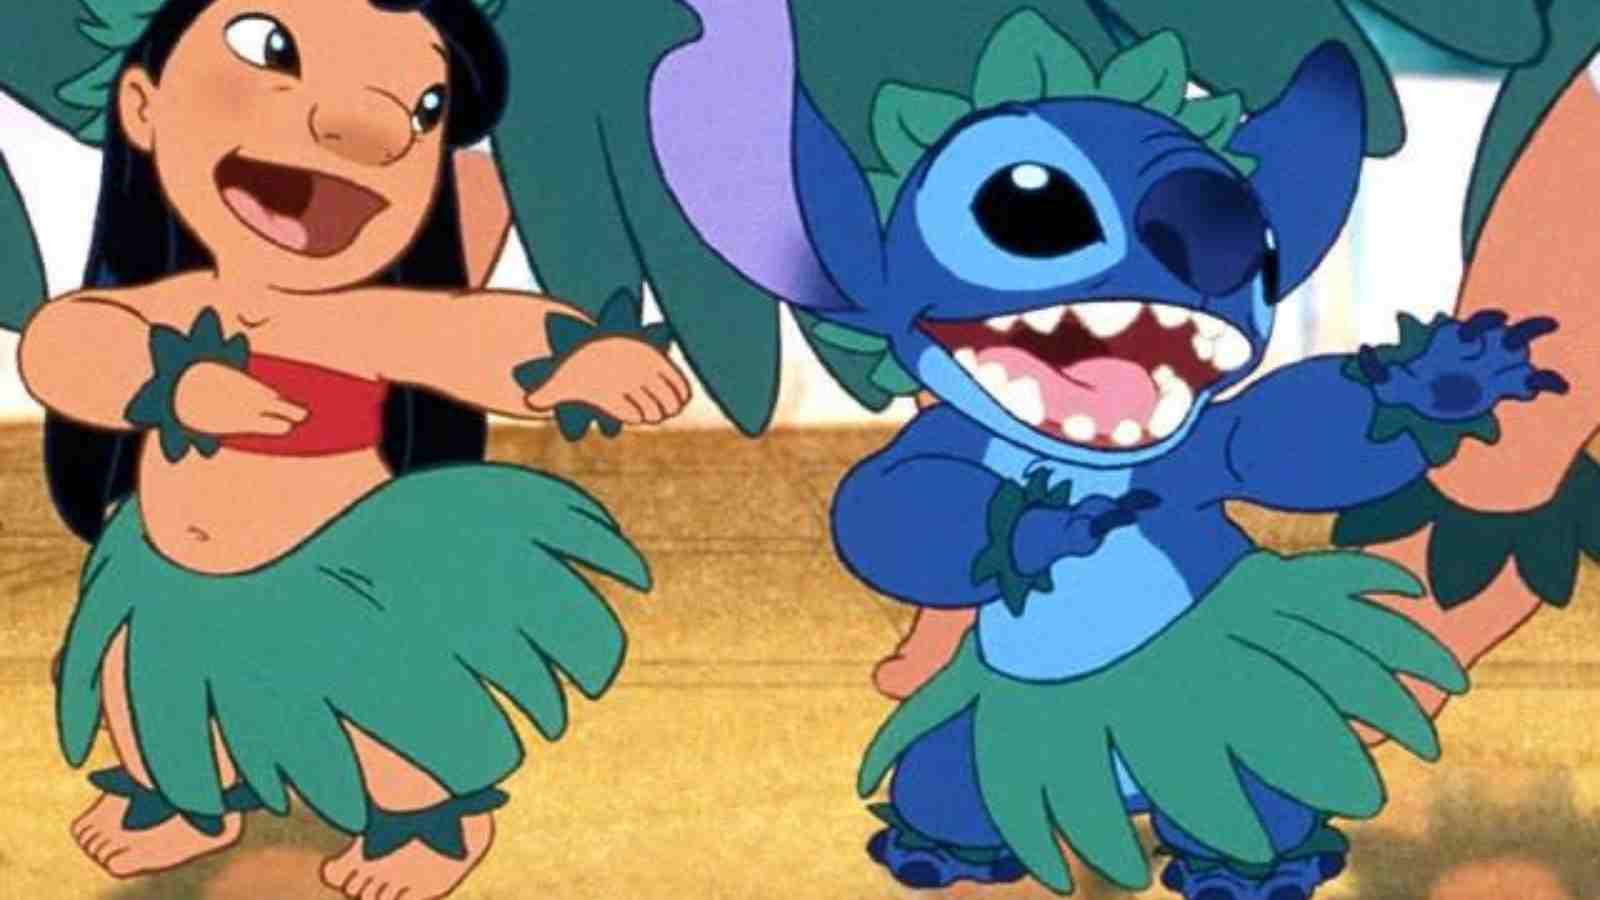 The Disney live action remake of Lilo & Stitch will be a challenge